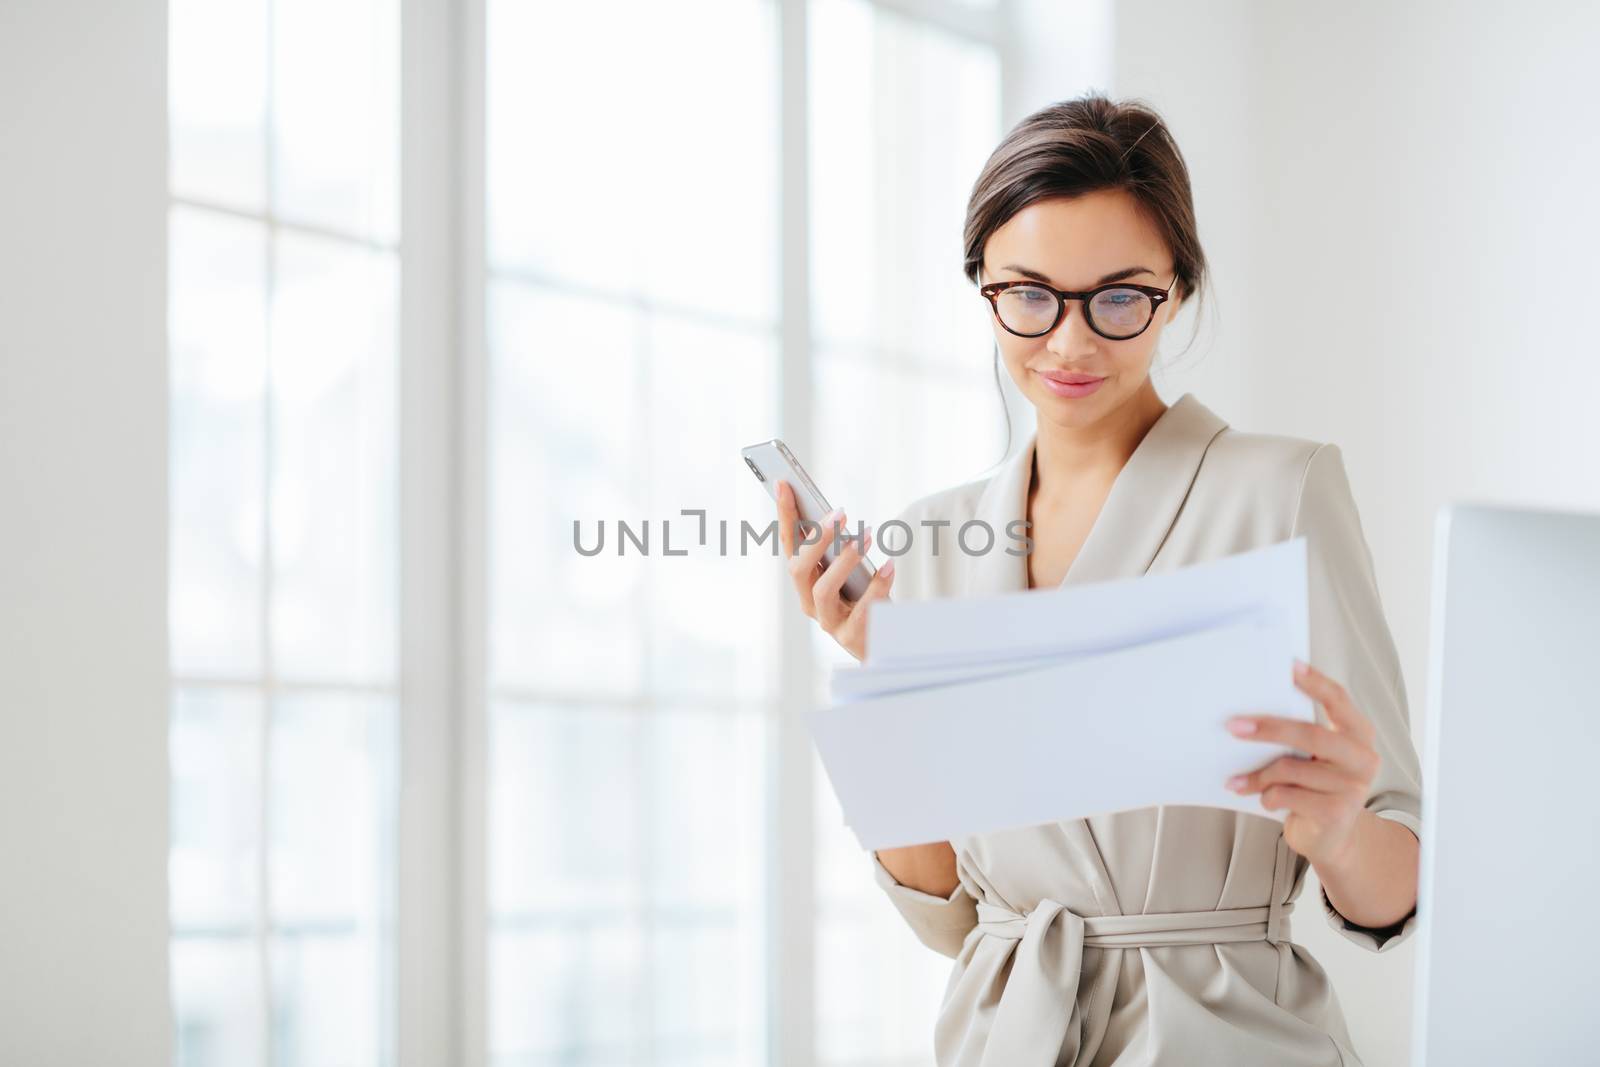 Satisfied female employee focused in documents, reads prepared report attentively, holds modern smartphone, wears transparent glasses and business suit poses over office interior checks monthly income